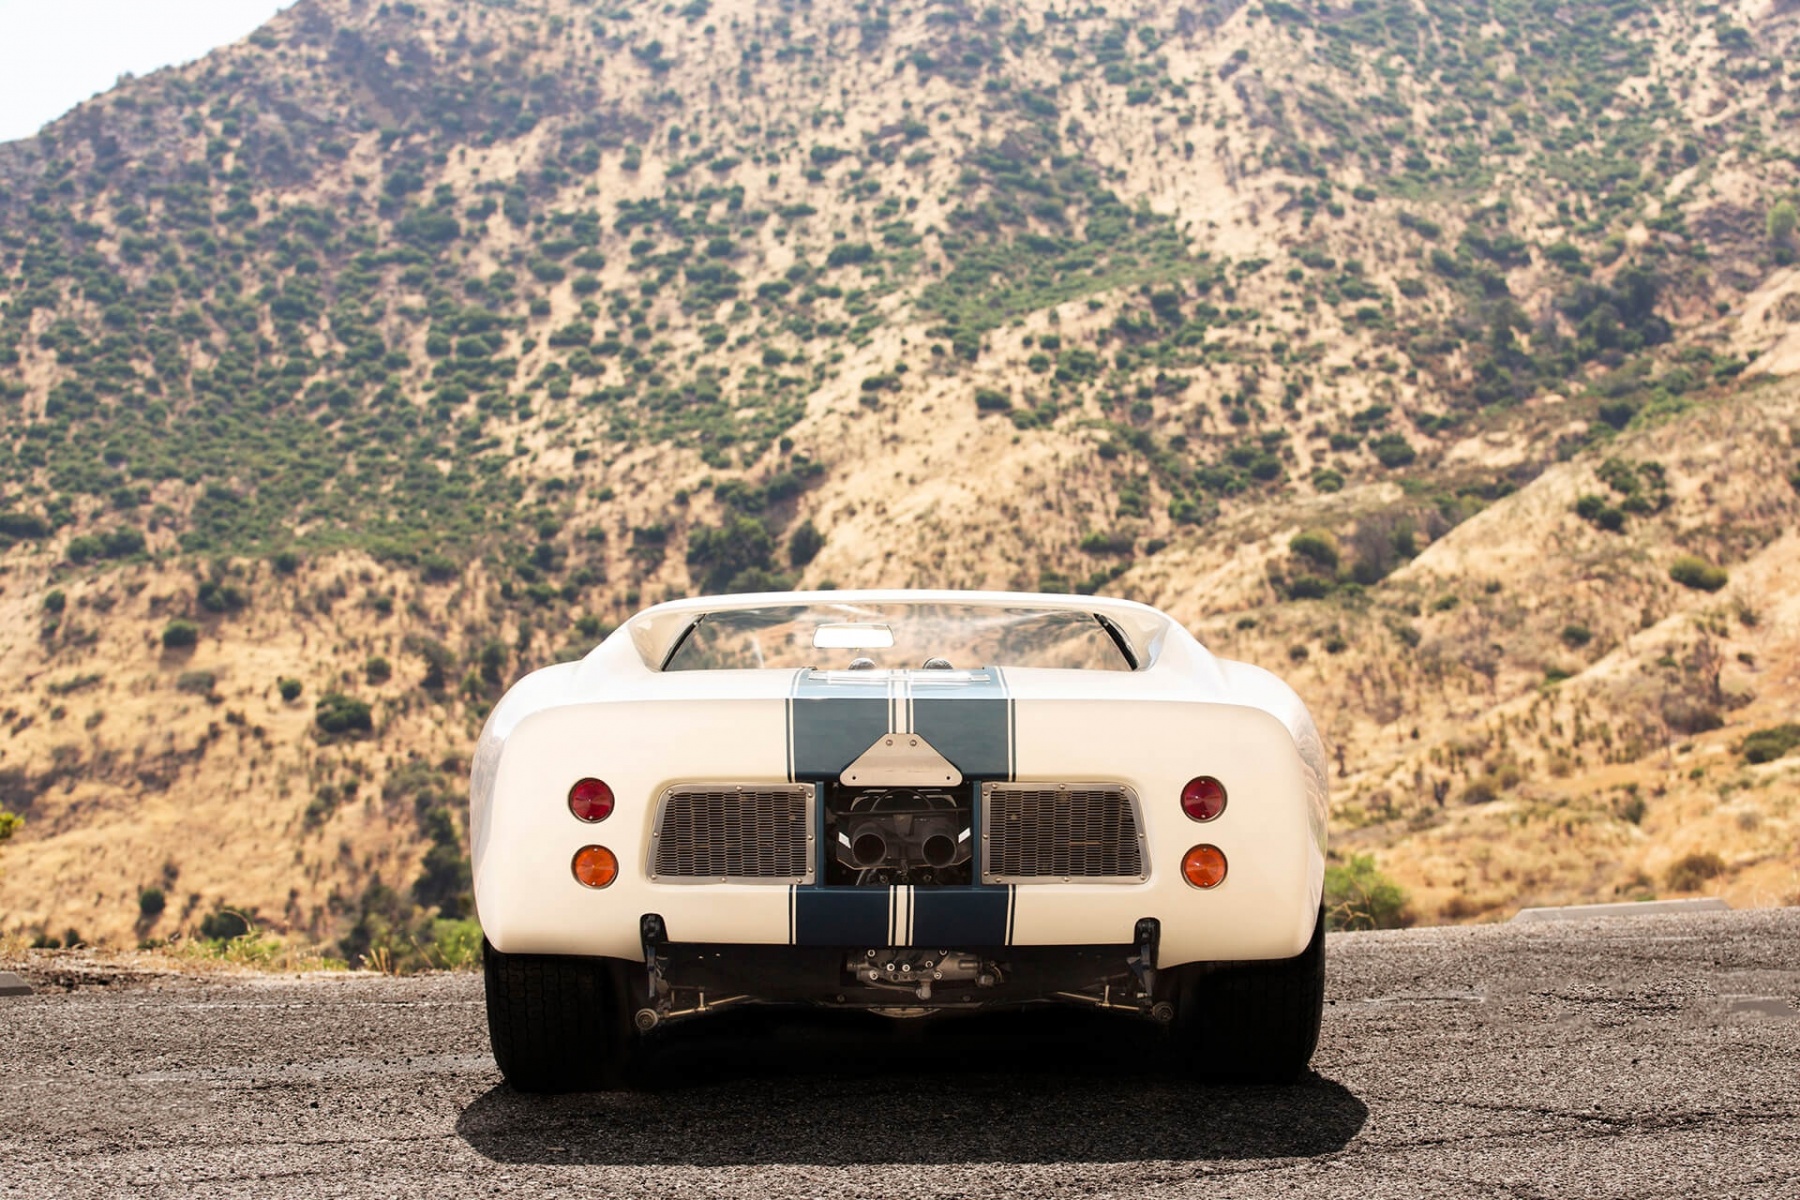 The Last Remaining Original Ford GT40 Roadster Is For Sale